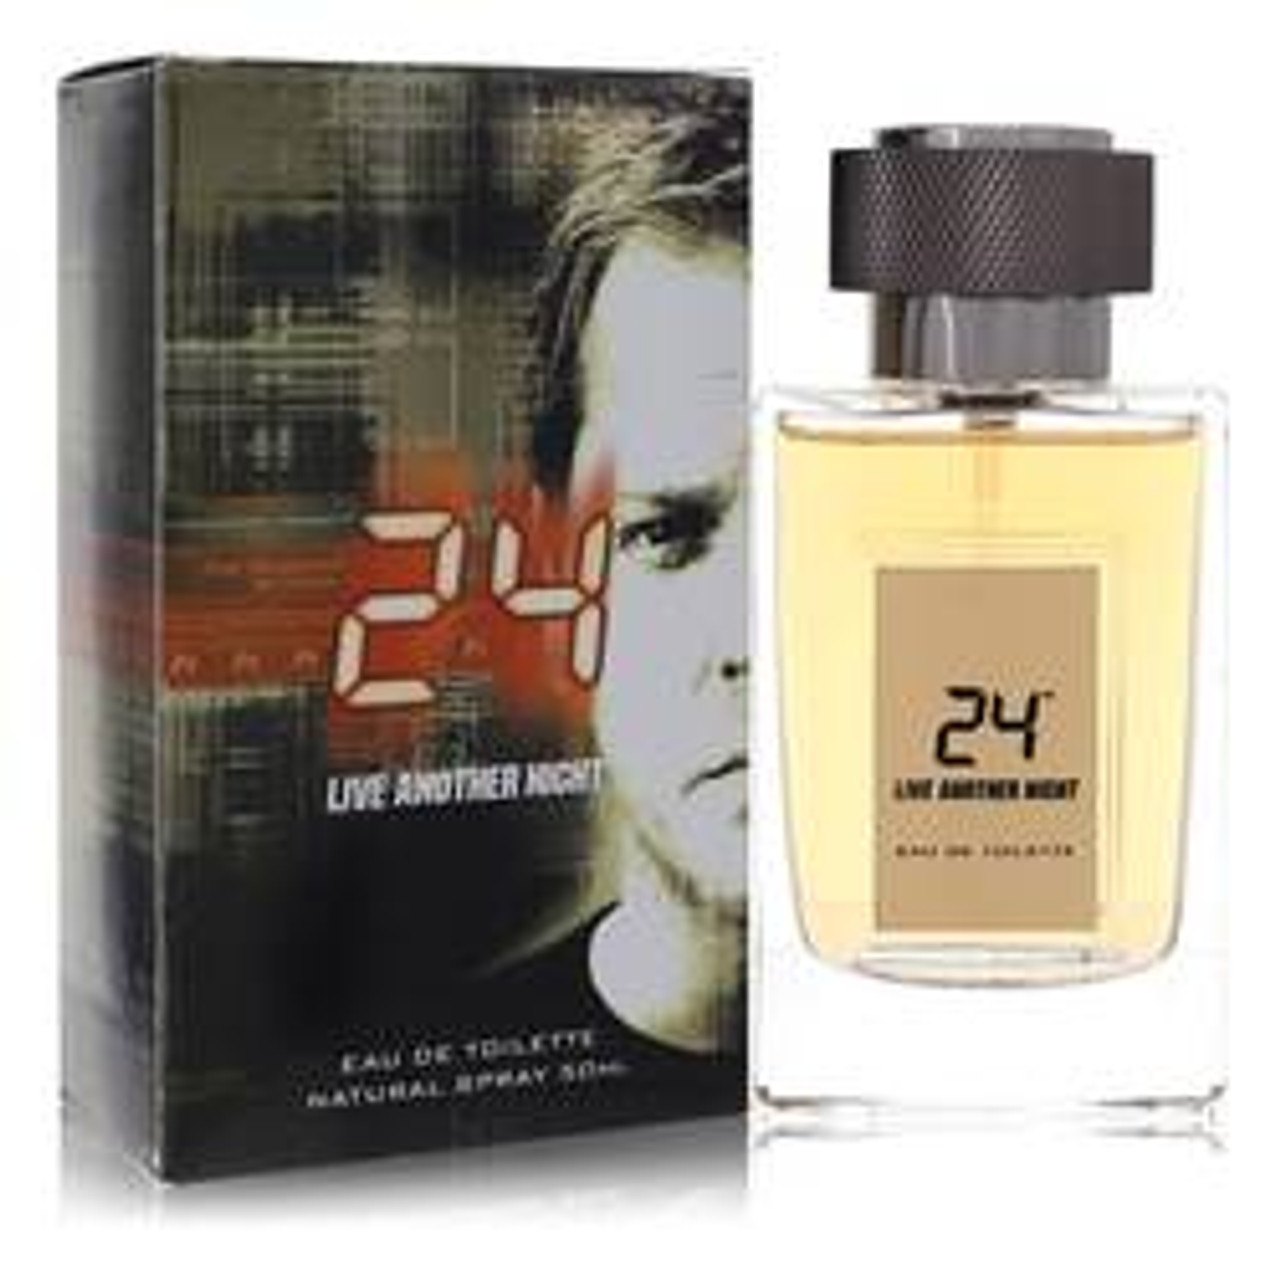 24 Live Another Night Cologne By Scentstory Eau De Toilette Spray 1.7 oz for Men - [From 43.00 - Choose pk Qty ] - *Ships from Miami